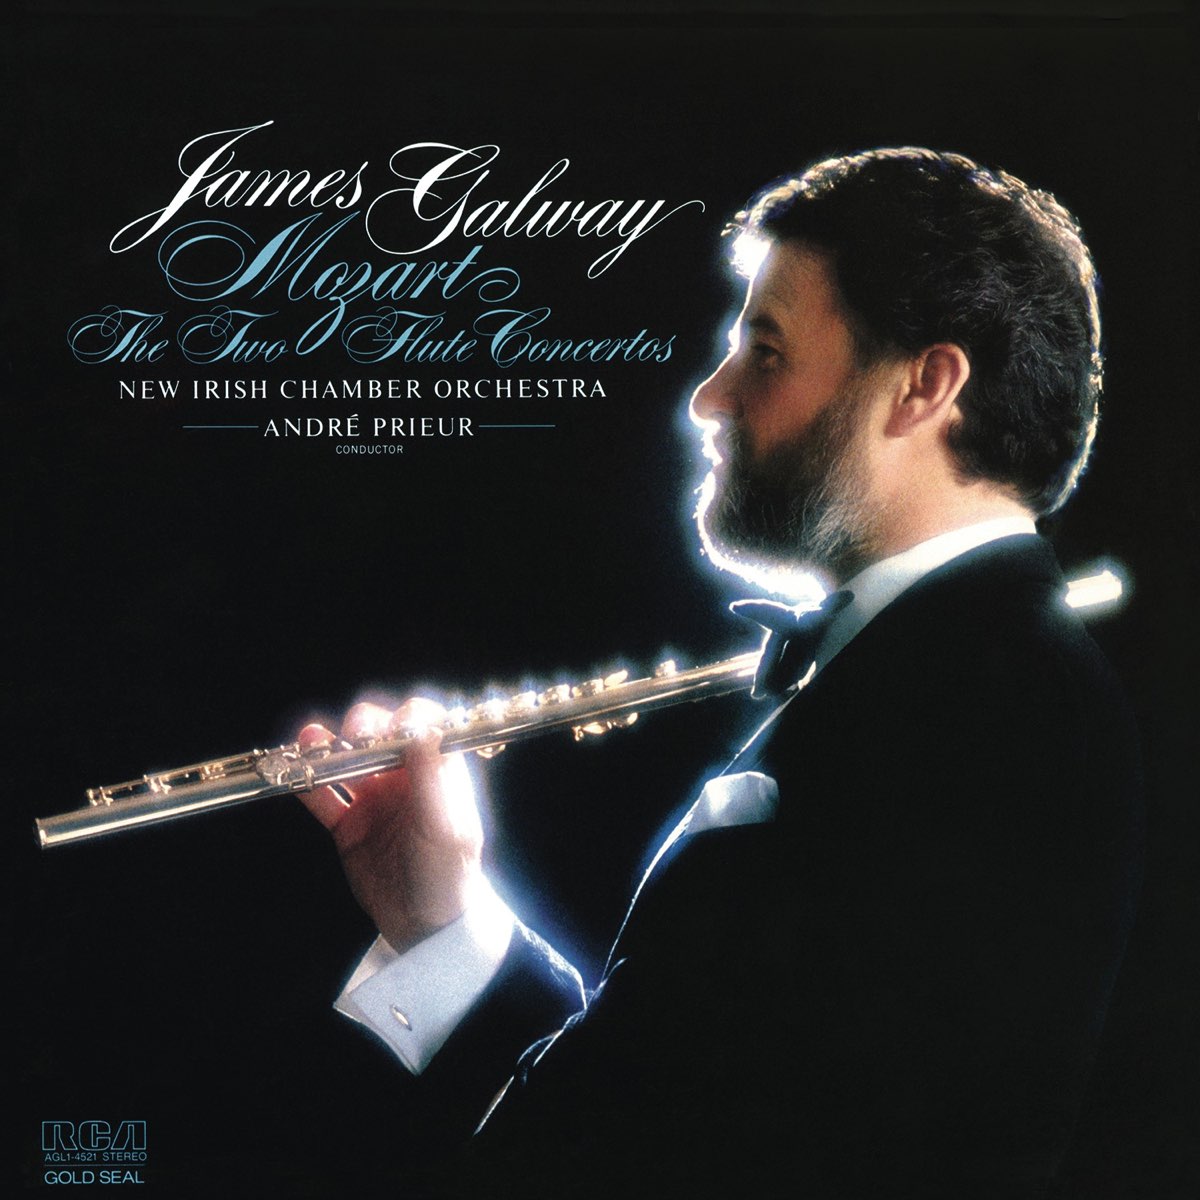 James Galway. James Galway - the Concerto collection (1990). James Galway - the Essential Flute of James Galway album Cover. Flute concertos